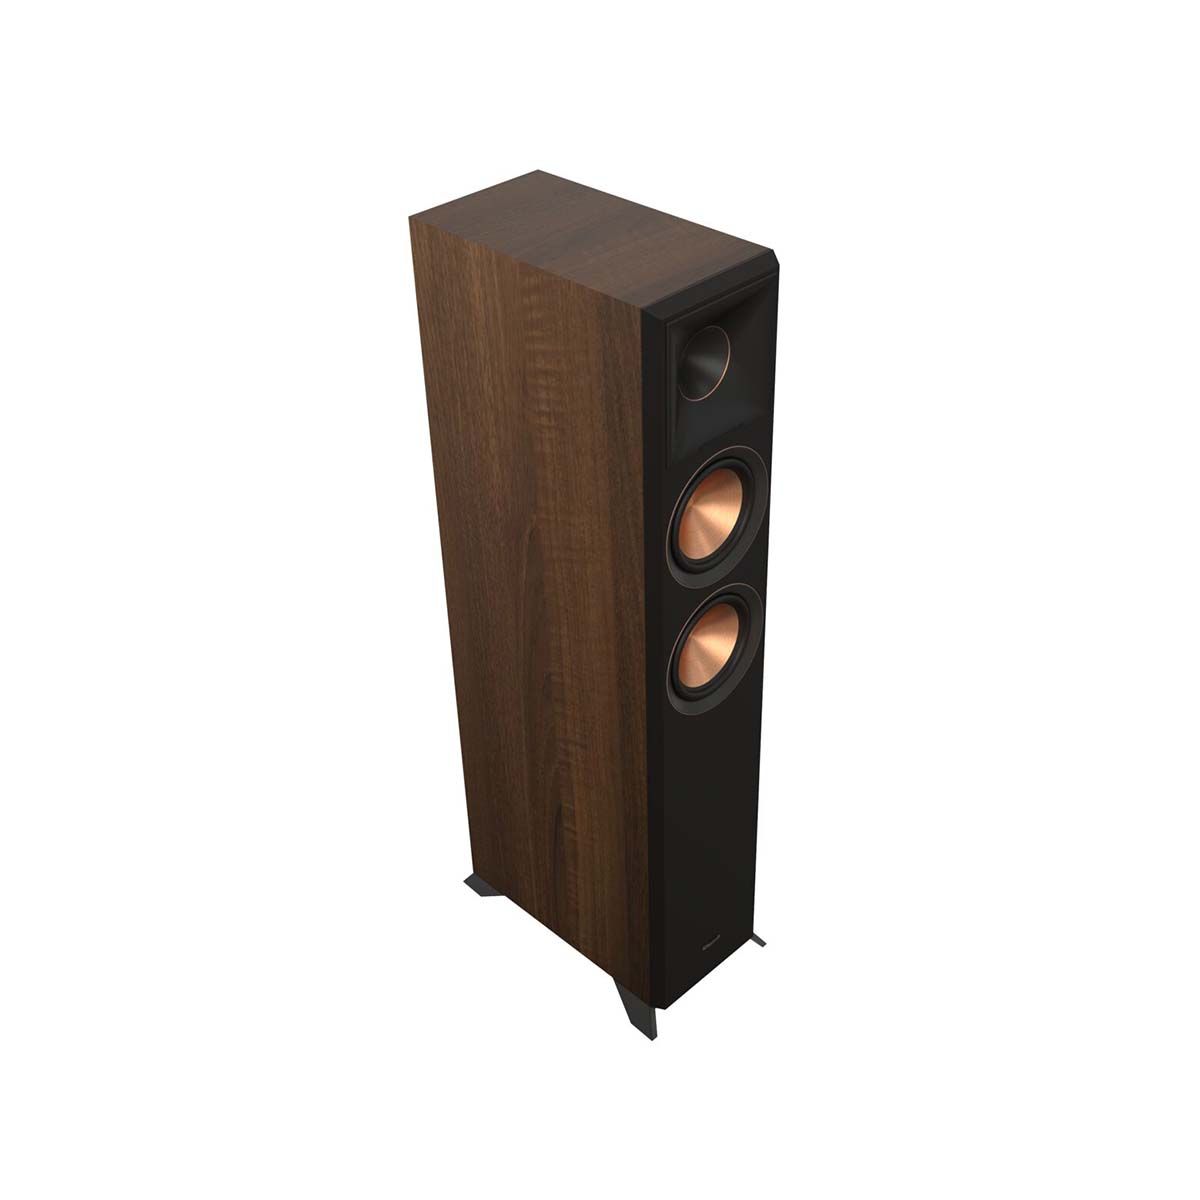 Klipsch RP-5000F II Floorstanding Speaker - Walnut - angled front view without grill